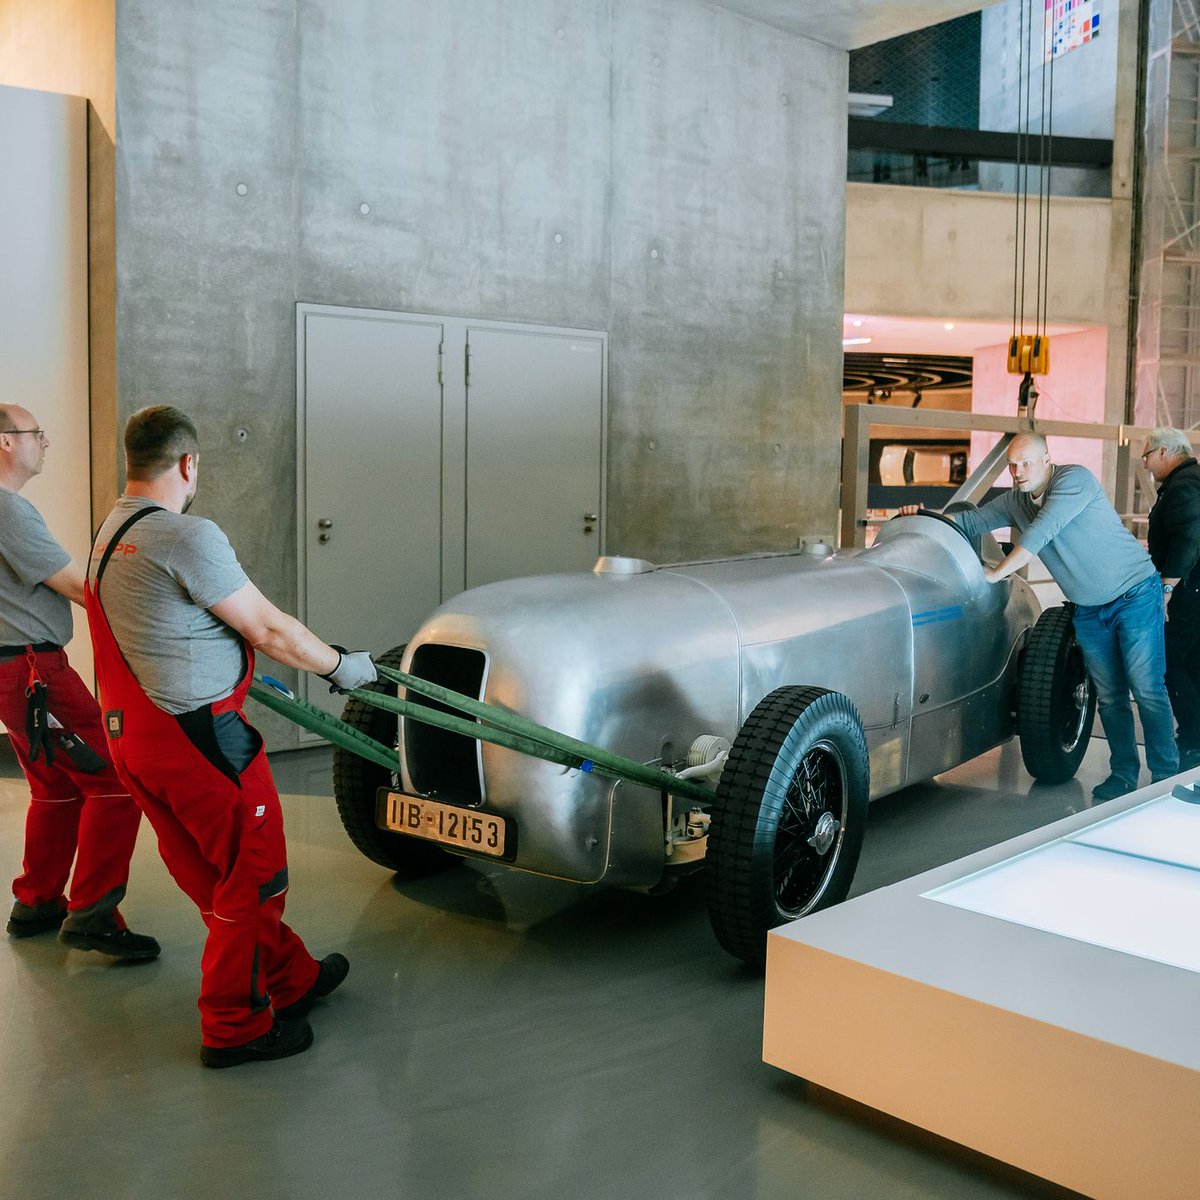 Welcome 'home,' Streamliner. In 1932, Manfred von Brauchitsch won the Avus race with a fully panelled SSKL - the first 'Silver Arrow!' Come and see this legendary race car in our museum. Tickets online: museum-ticket.mercedes-benz.com #MBmuseum